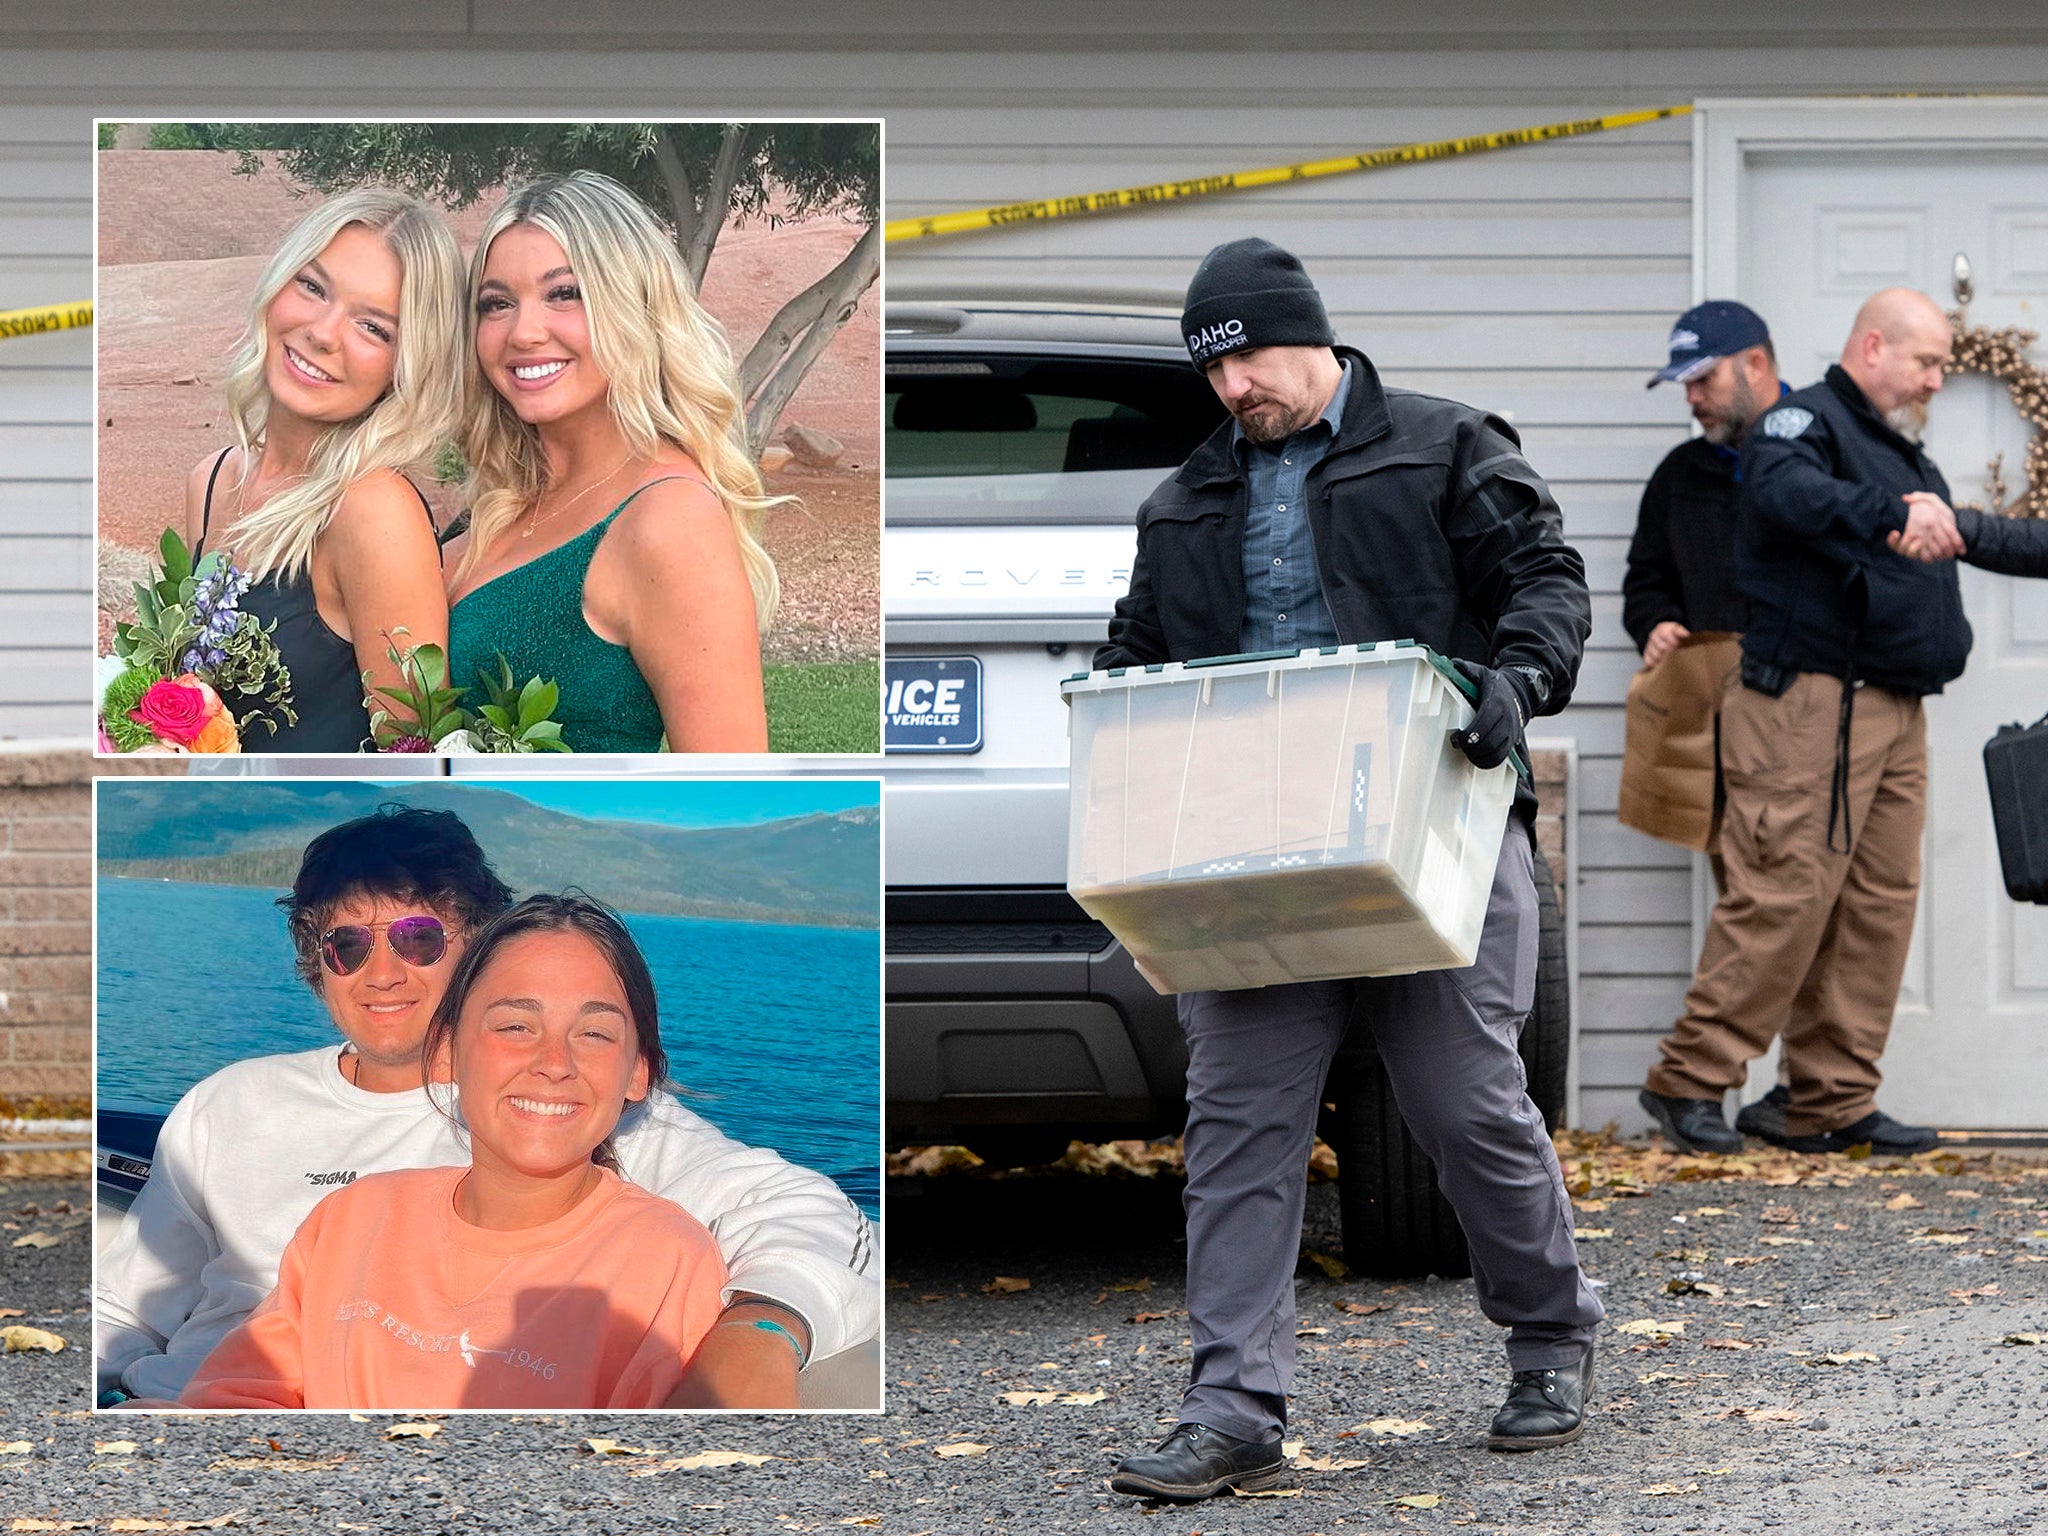 Police still don’t have any suspects in the murder of Madison Mogen, Kaylee Goncalves, Xana Kerndole and Ethan Chapin